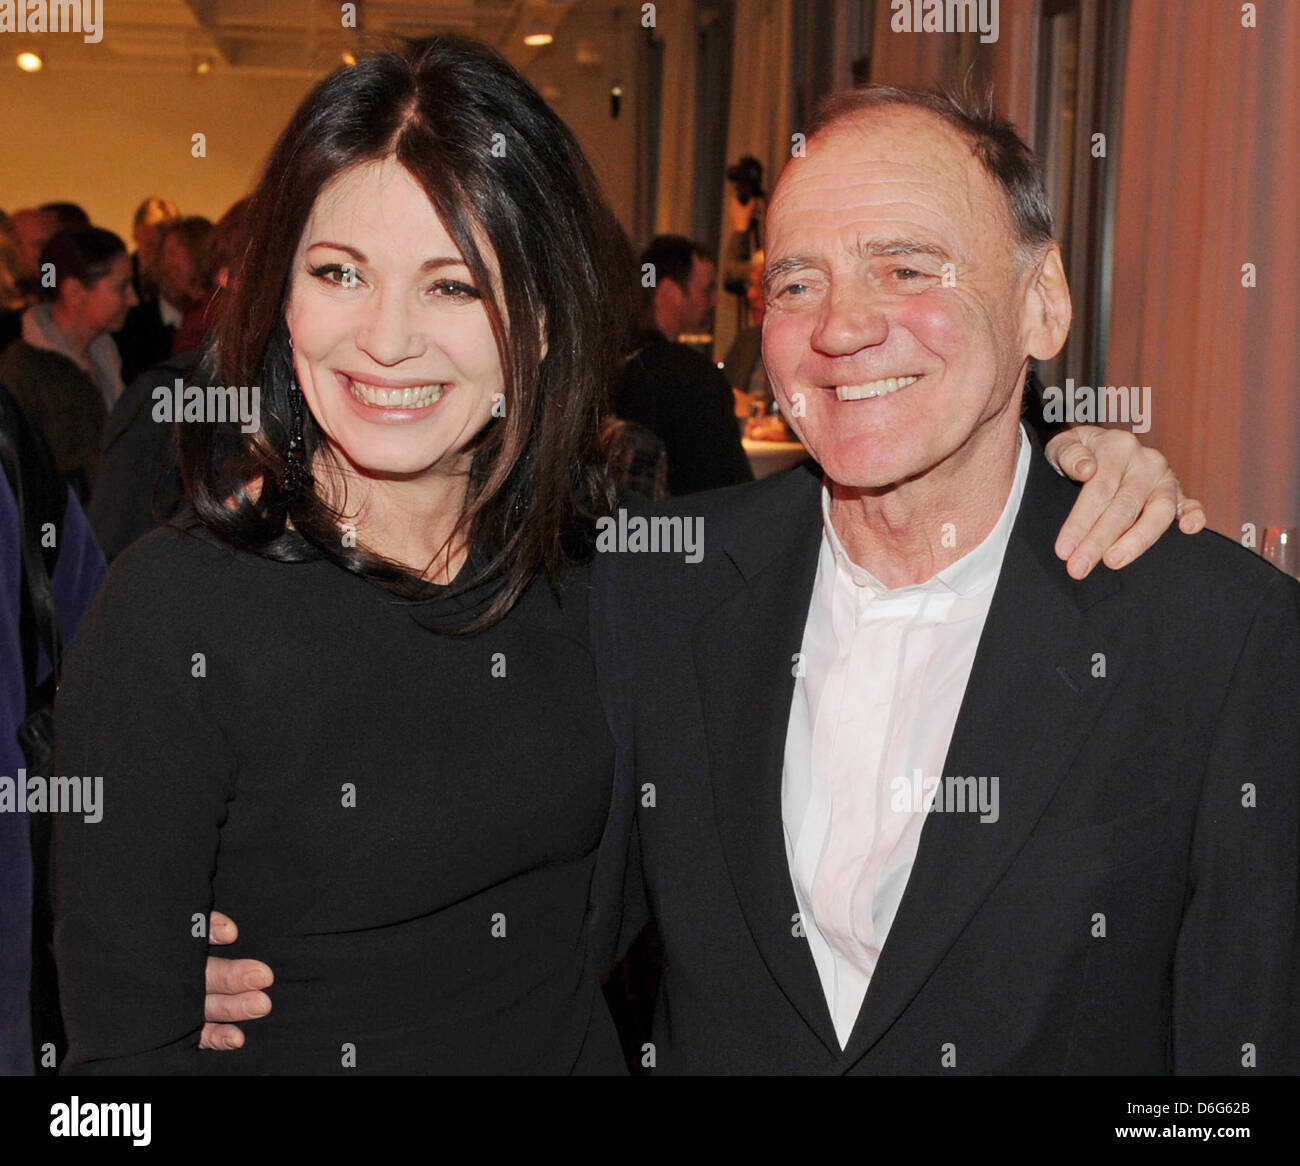 German actresss Iris Berben and Swiss actor Bruno Ganz attend the reception for the new section German Cinema 'LOLA@berlinale' during the 62nd Berlin International Film Festival, in Berlin, Germany, 10 February 2012. The 62nd Berlinale takes place from 09 to 19 February. Photo: Jens Kalaene dpa Stock Photo